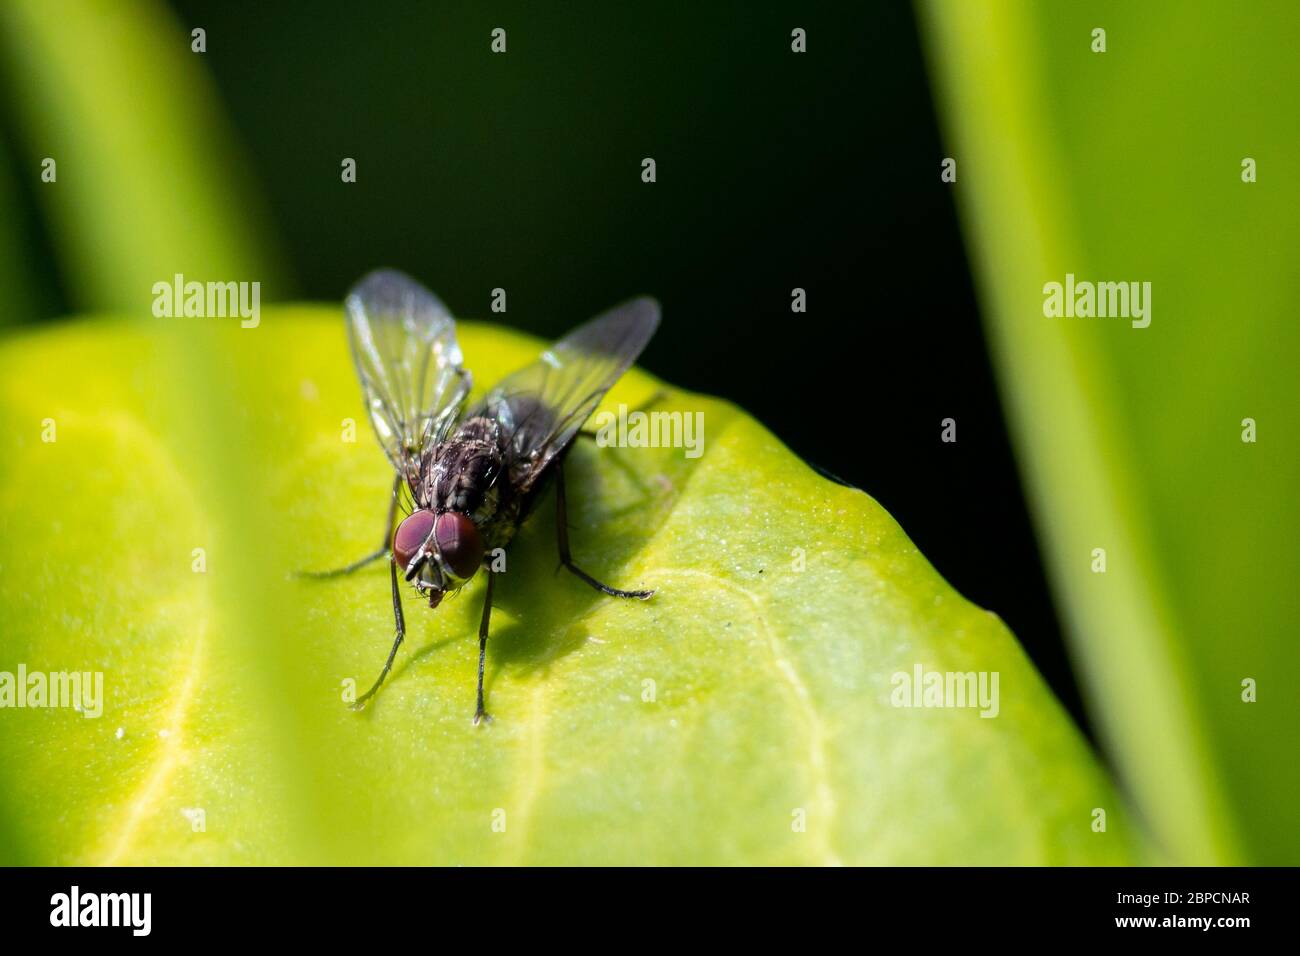 Closeup of Fly on a Green Leaf Stock Photo